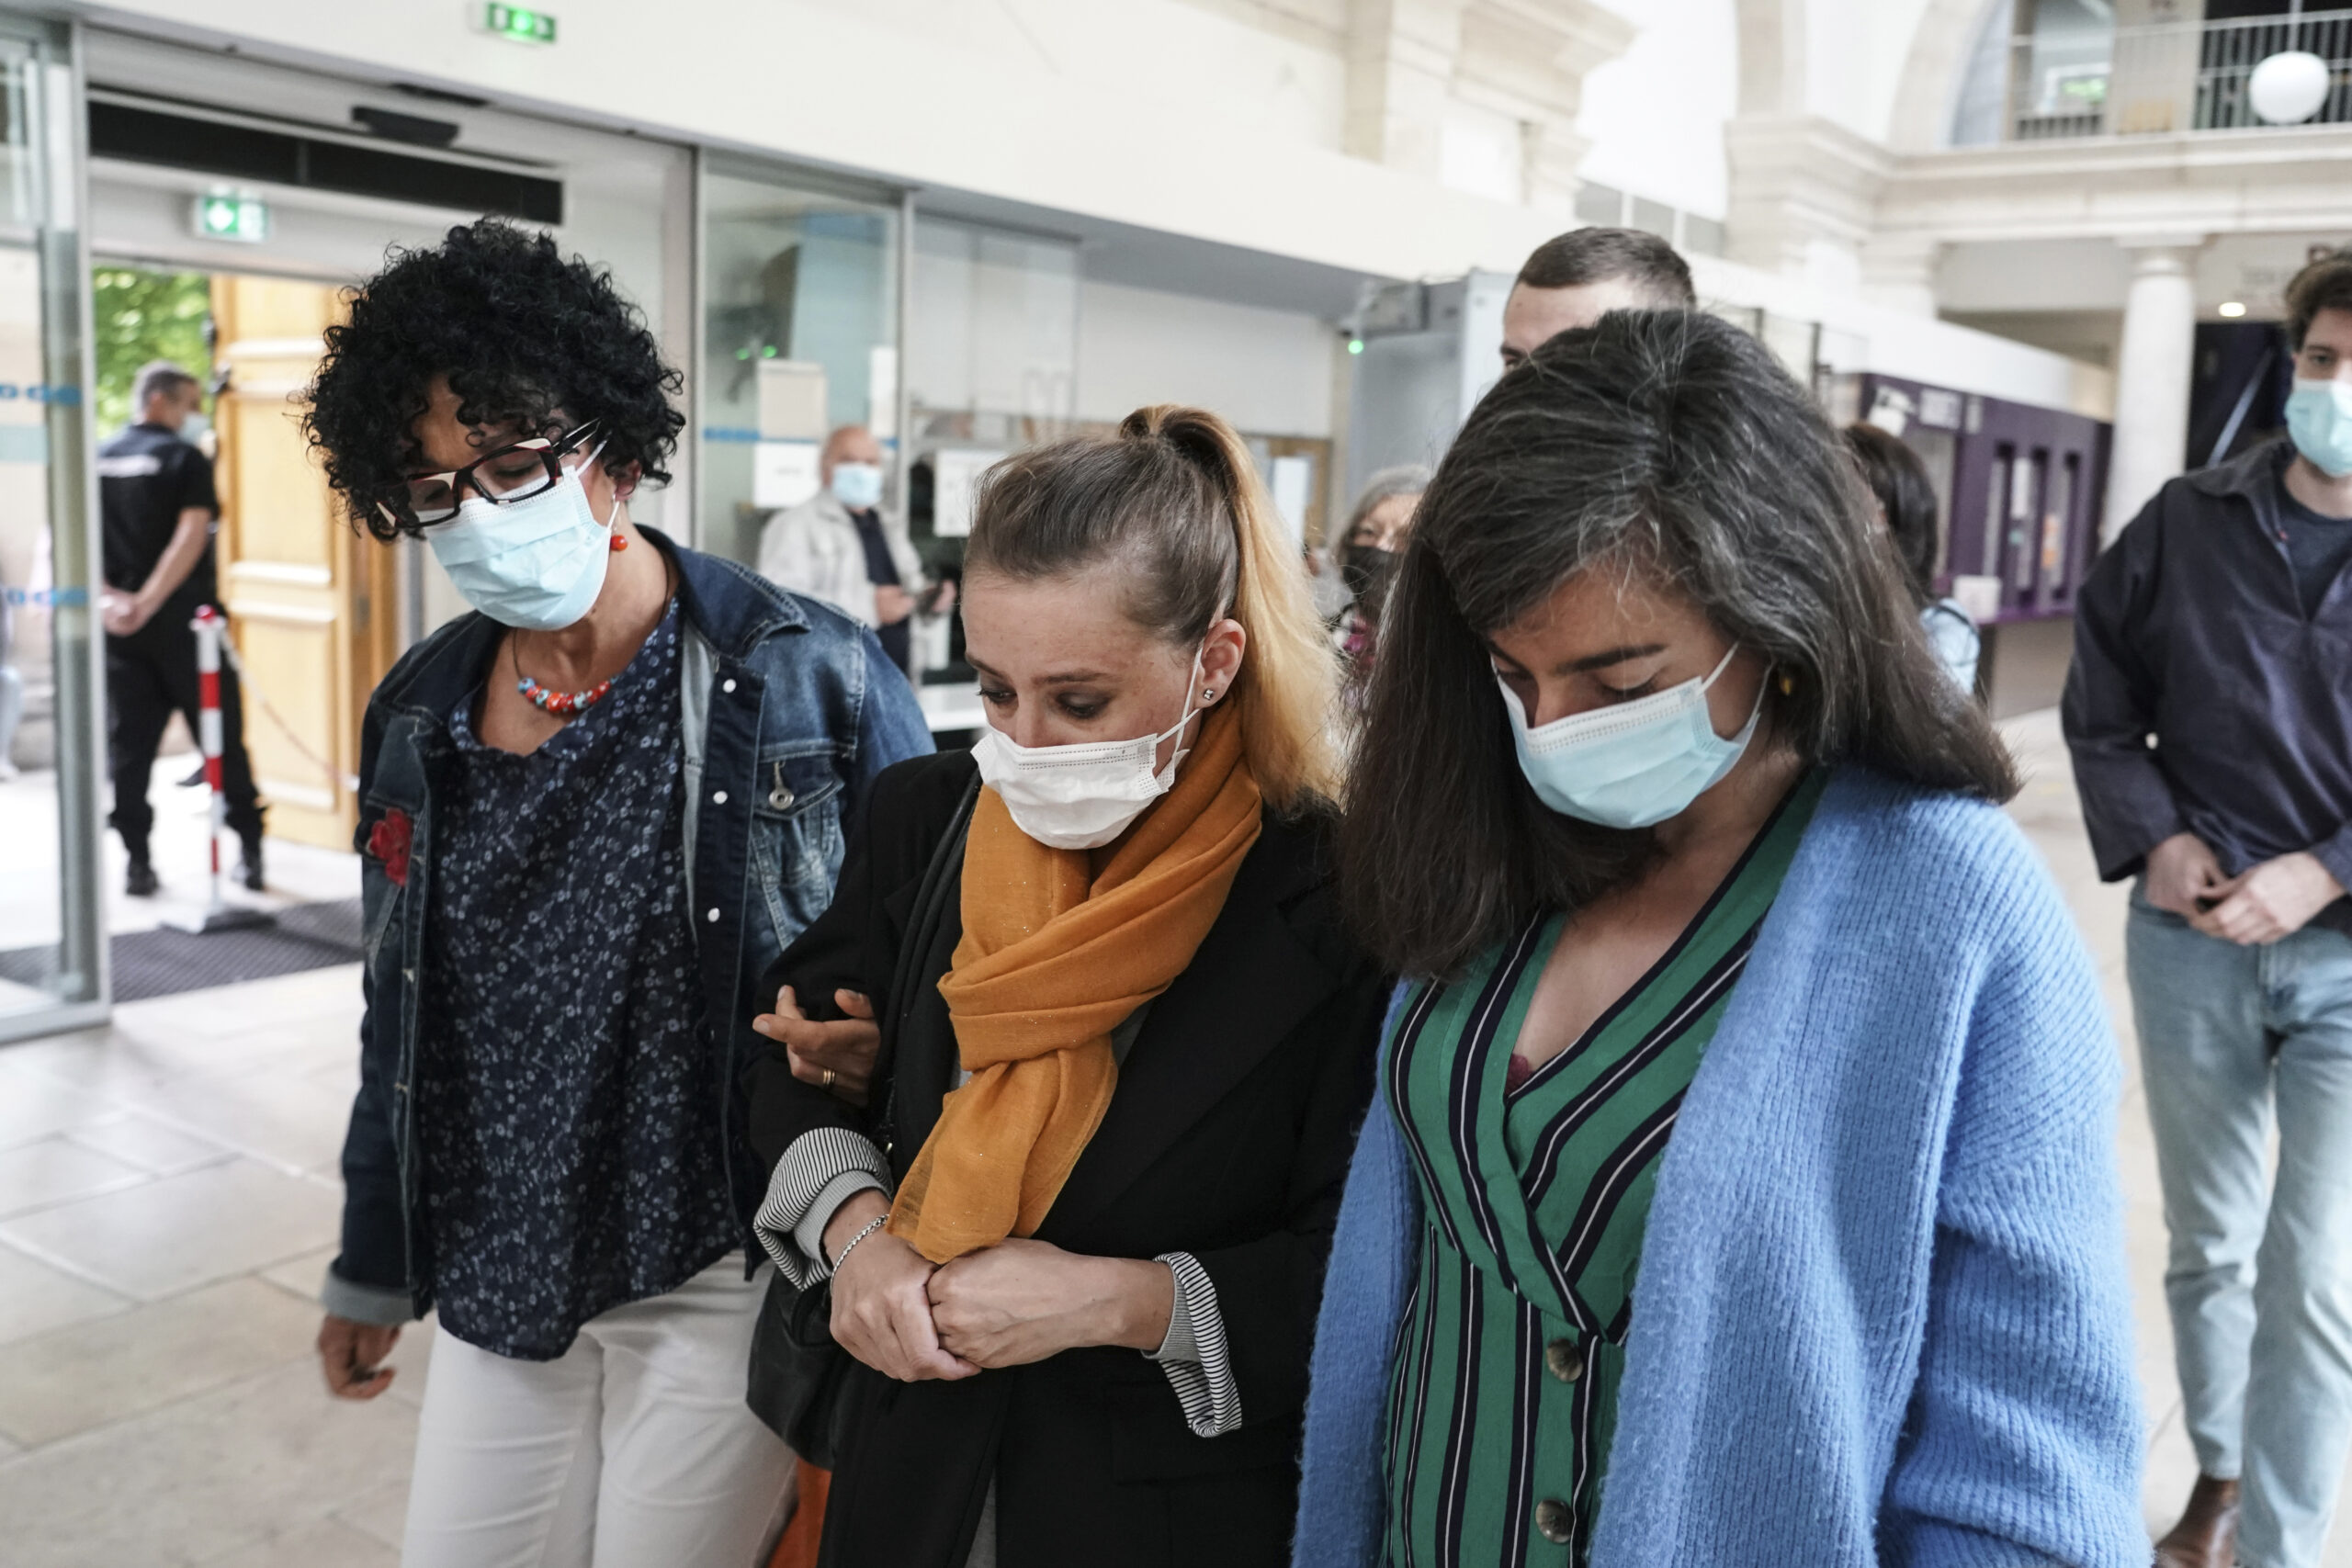 Valerie Bacot, center, arrives with relatives at the Chalon-sur-Saone courthouse, central France, Thursday, June 24, 2021. Valerie Bacot is on trial in France for killing her husband after decades of sexual, physical and psychological abuse starting when she was an adolescent, in a case that has drawn broad attention and support for Bacot amid a national reckoning with long-held taboos around domestic abuse. (AP Photo/Laurent Cipriani)